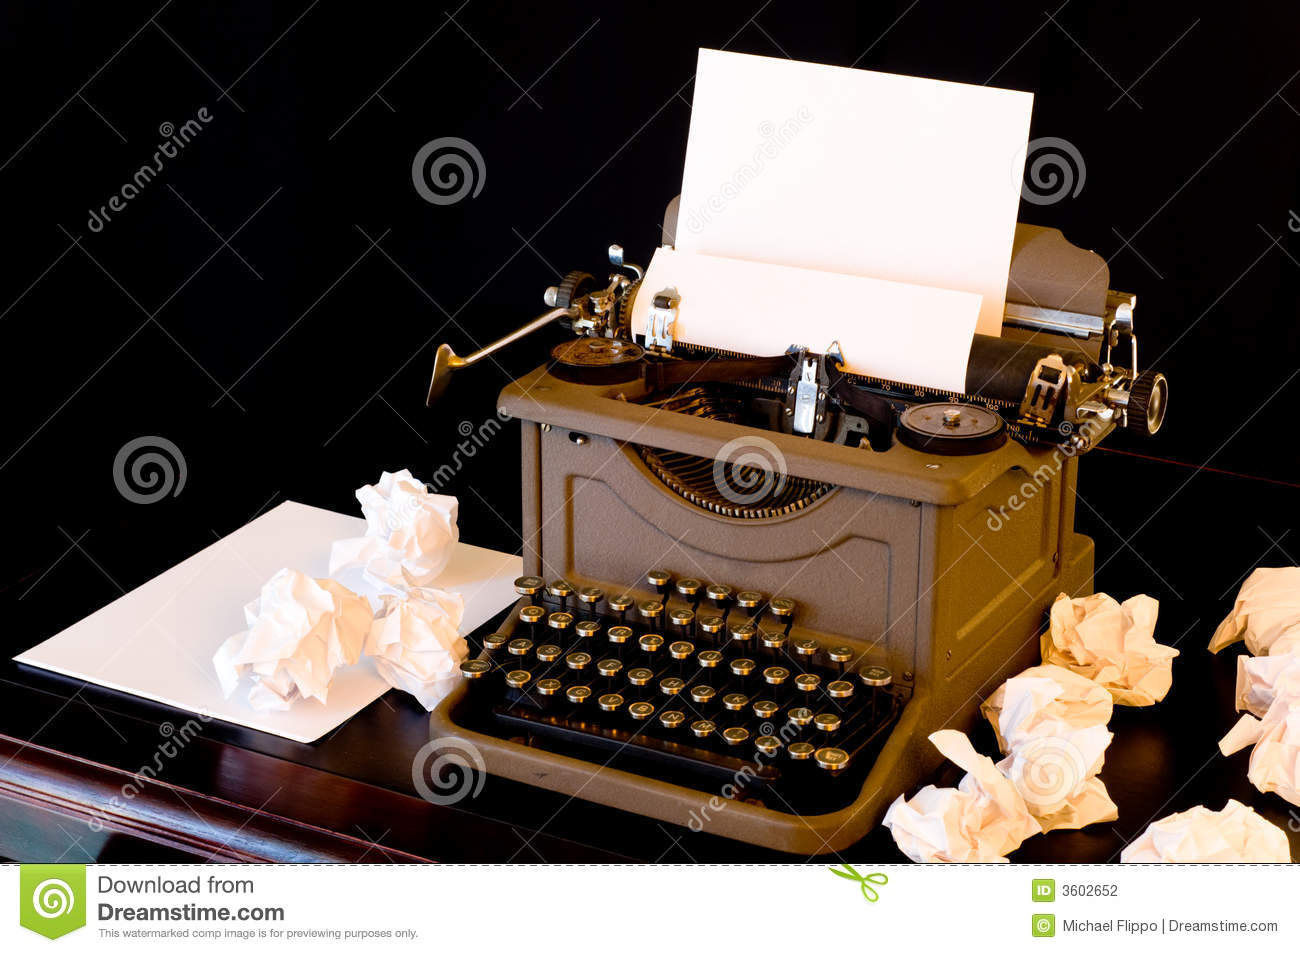 Vaintage Typewriter With Several Wadded Up Pieces Of Paper Arranged